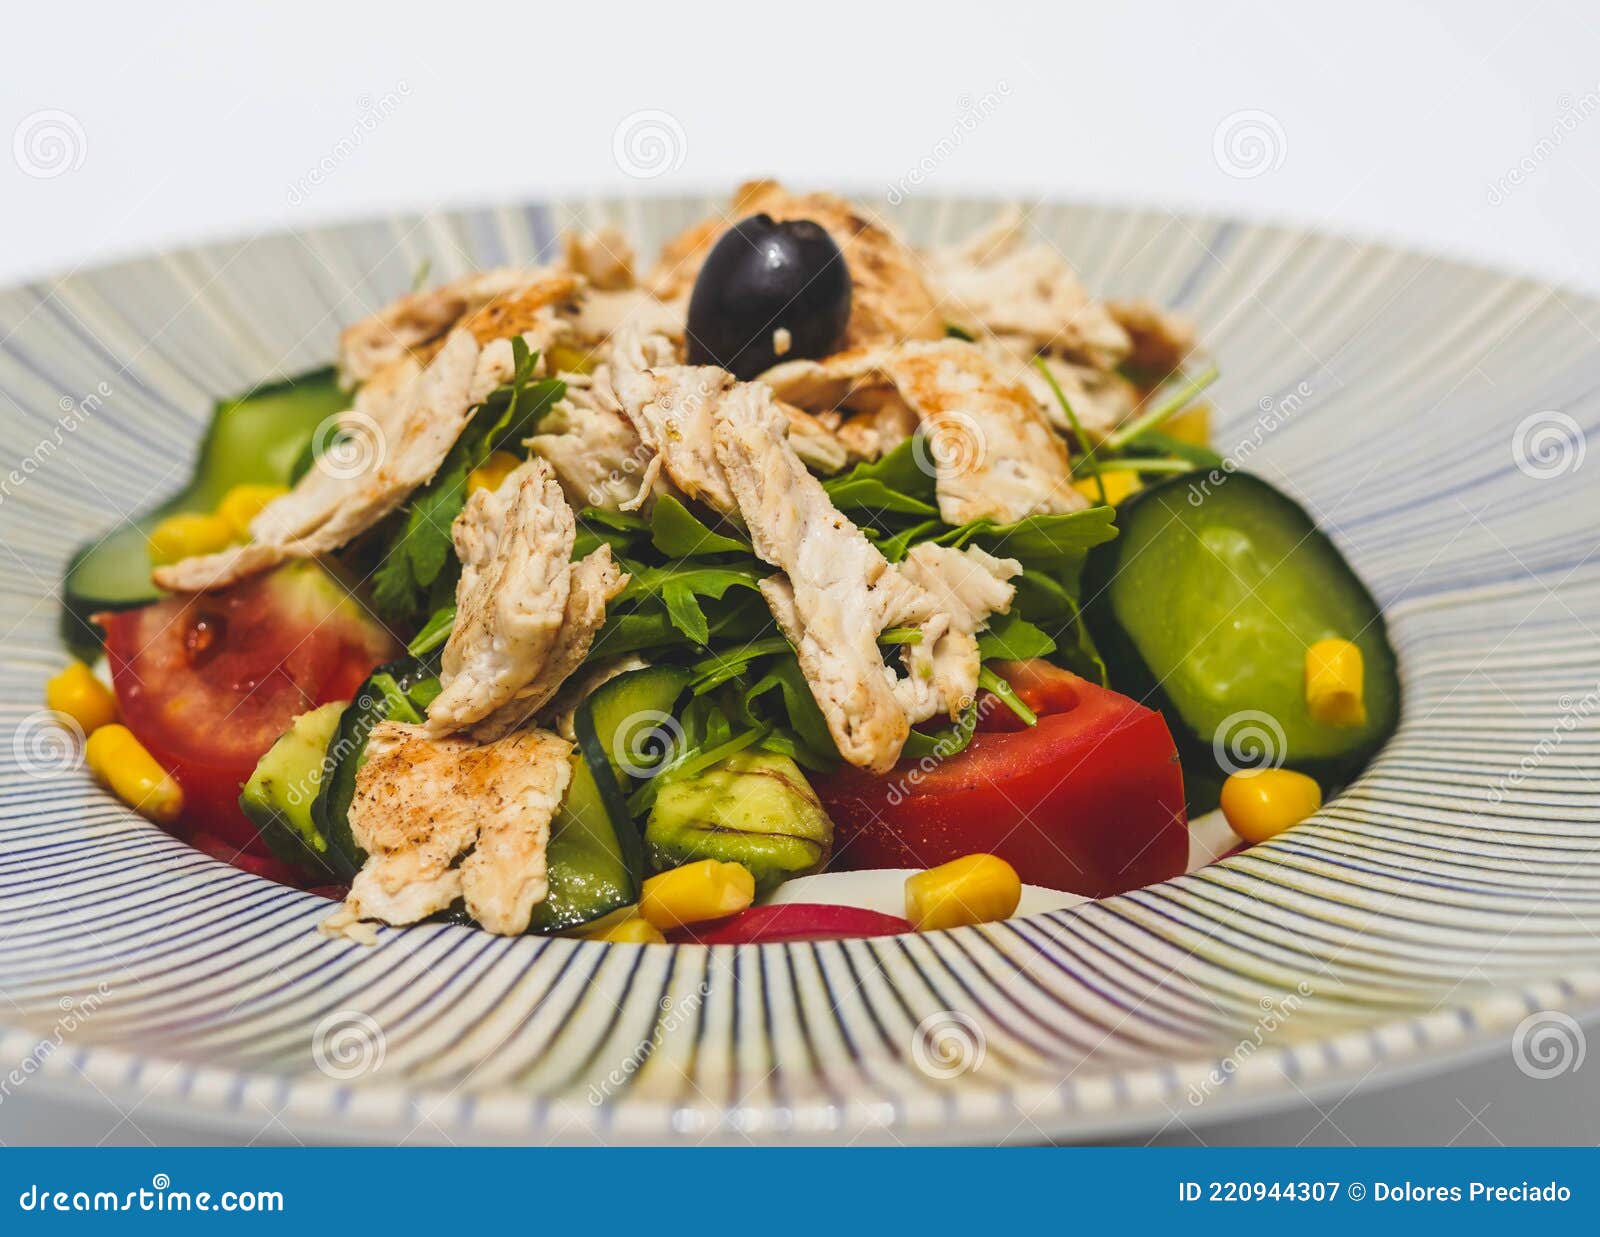 Chicken Salad with Lettuce, Tomato and Cucumber Stock Image - Image of ...